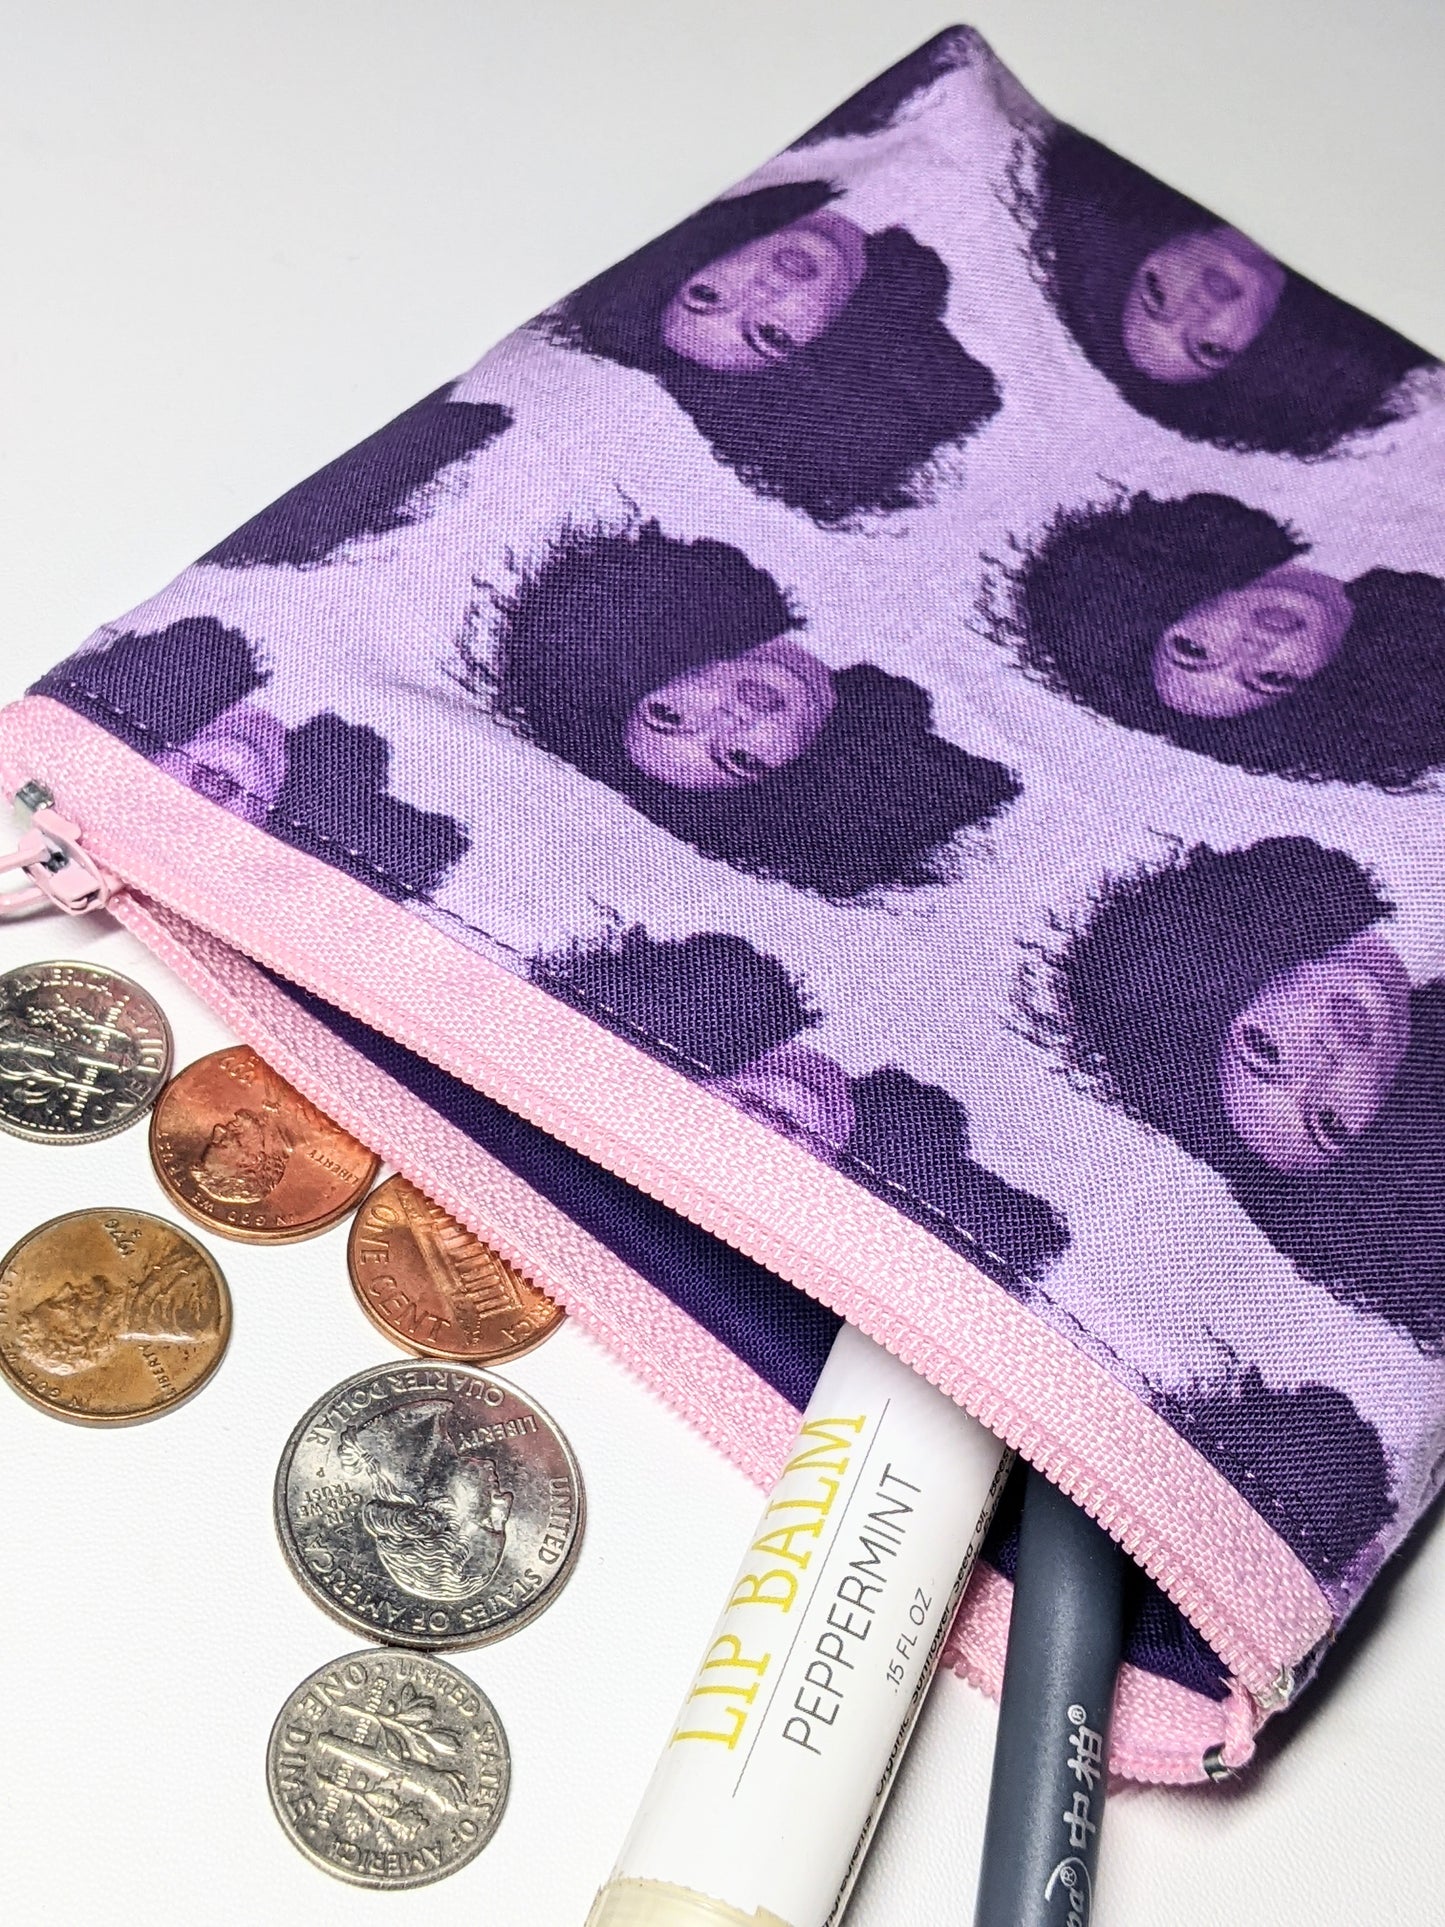 It's About Damn Time Coin Purse